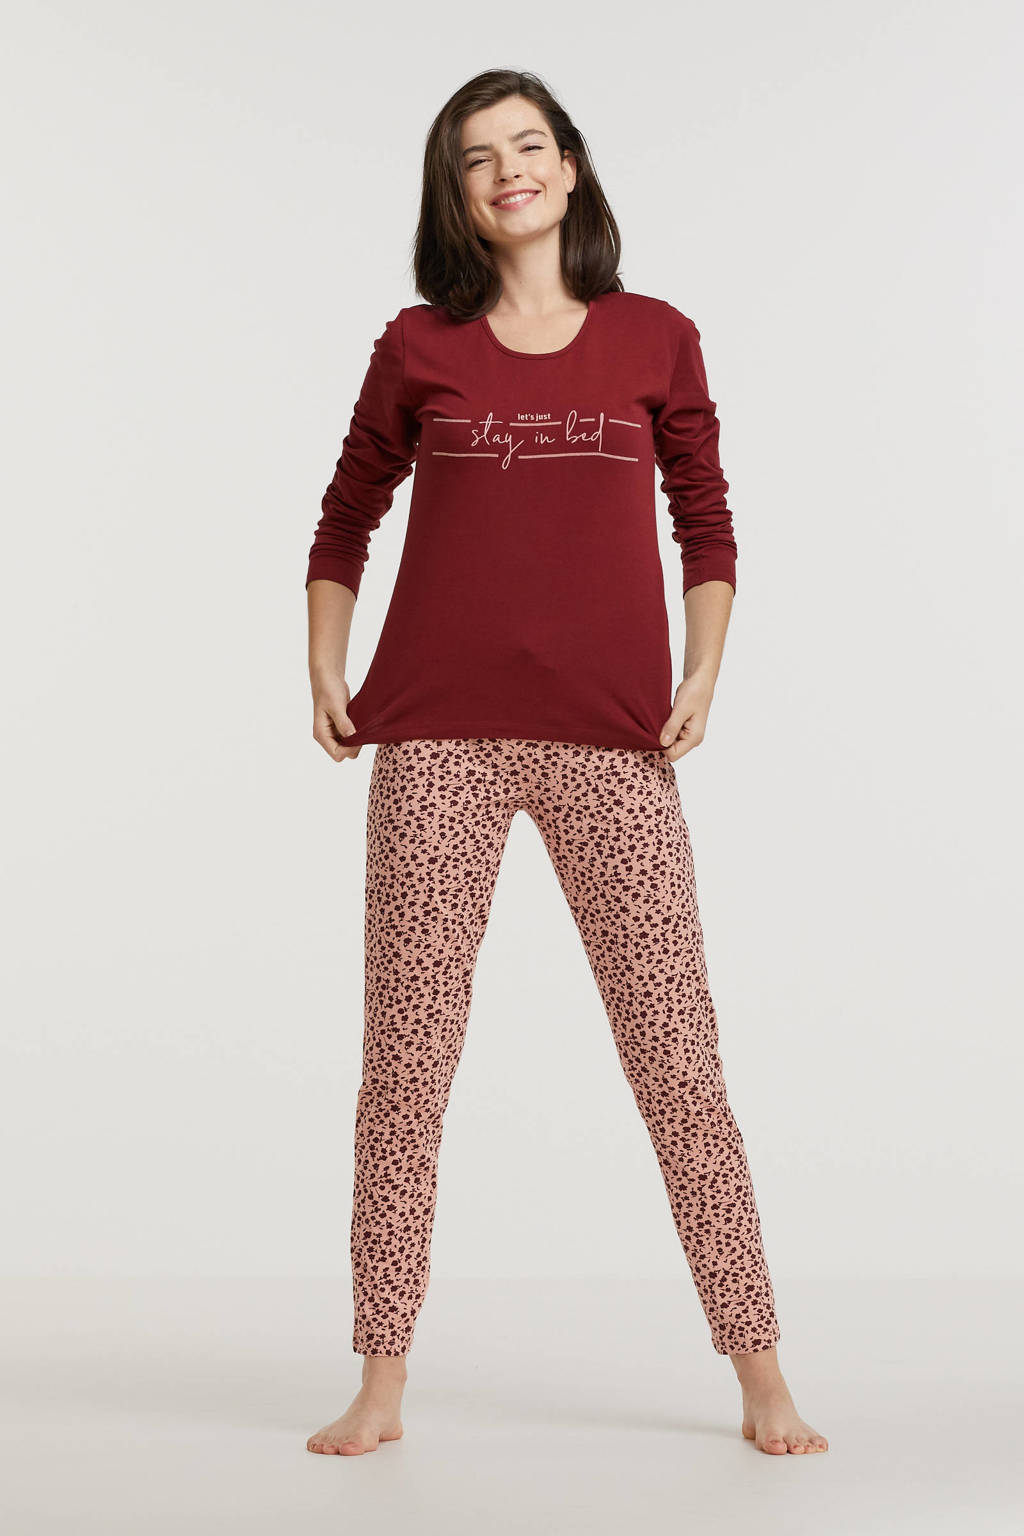 Dreamcovers pyjama met all over print donkerrood/roze, Donkerrood/roze